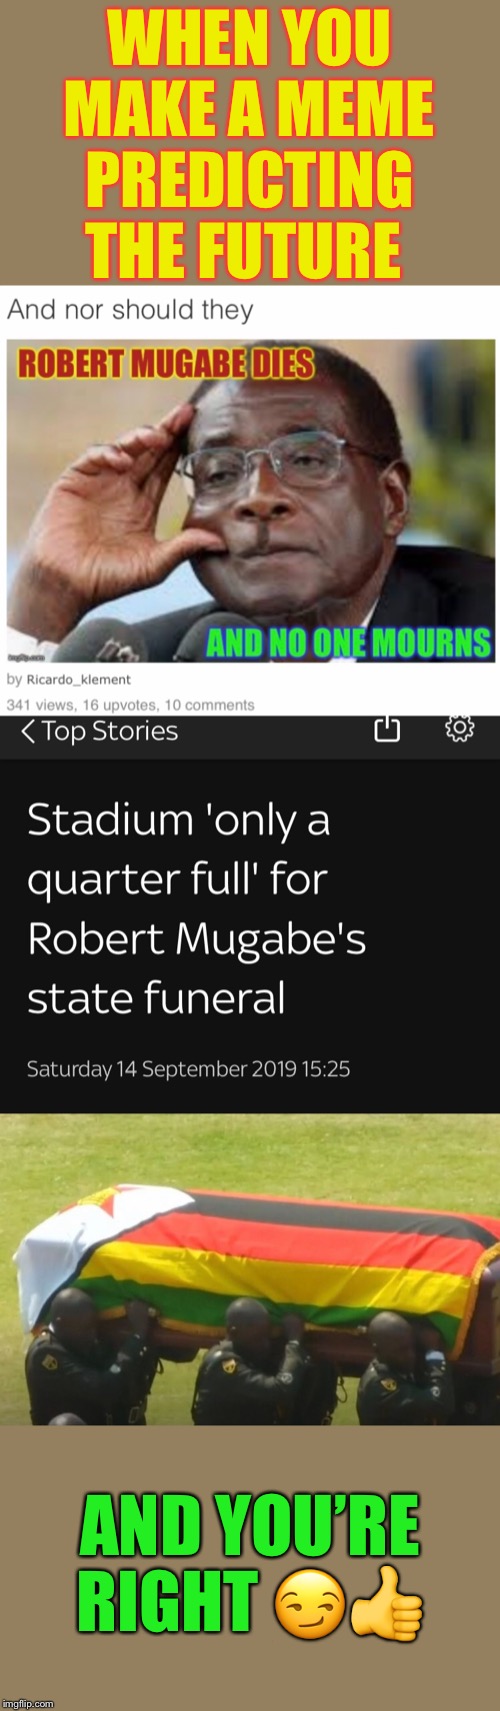 Just put him in the landfill & have done with it. | WHEN YOU MAKE A MEME PREDICTING THE FUTURE; AND YOU’RE RIGHT 😏👍 | image tagged in robert mugabe,state funeral,no body cares,good riddance,prediction | made w/ Imgflip meme maker